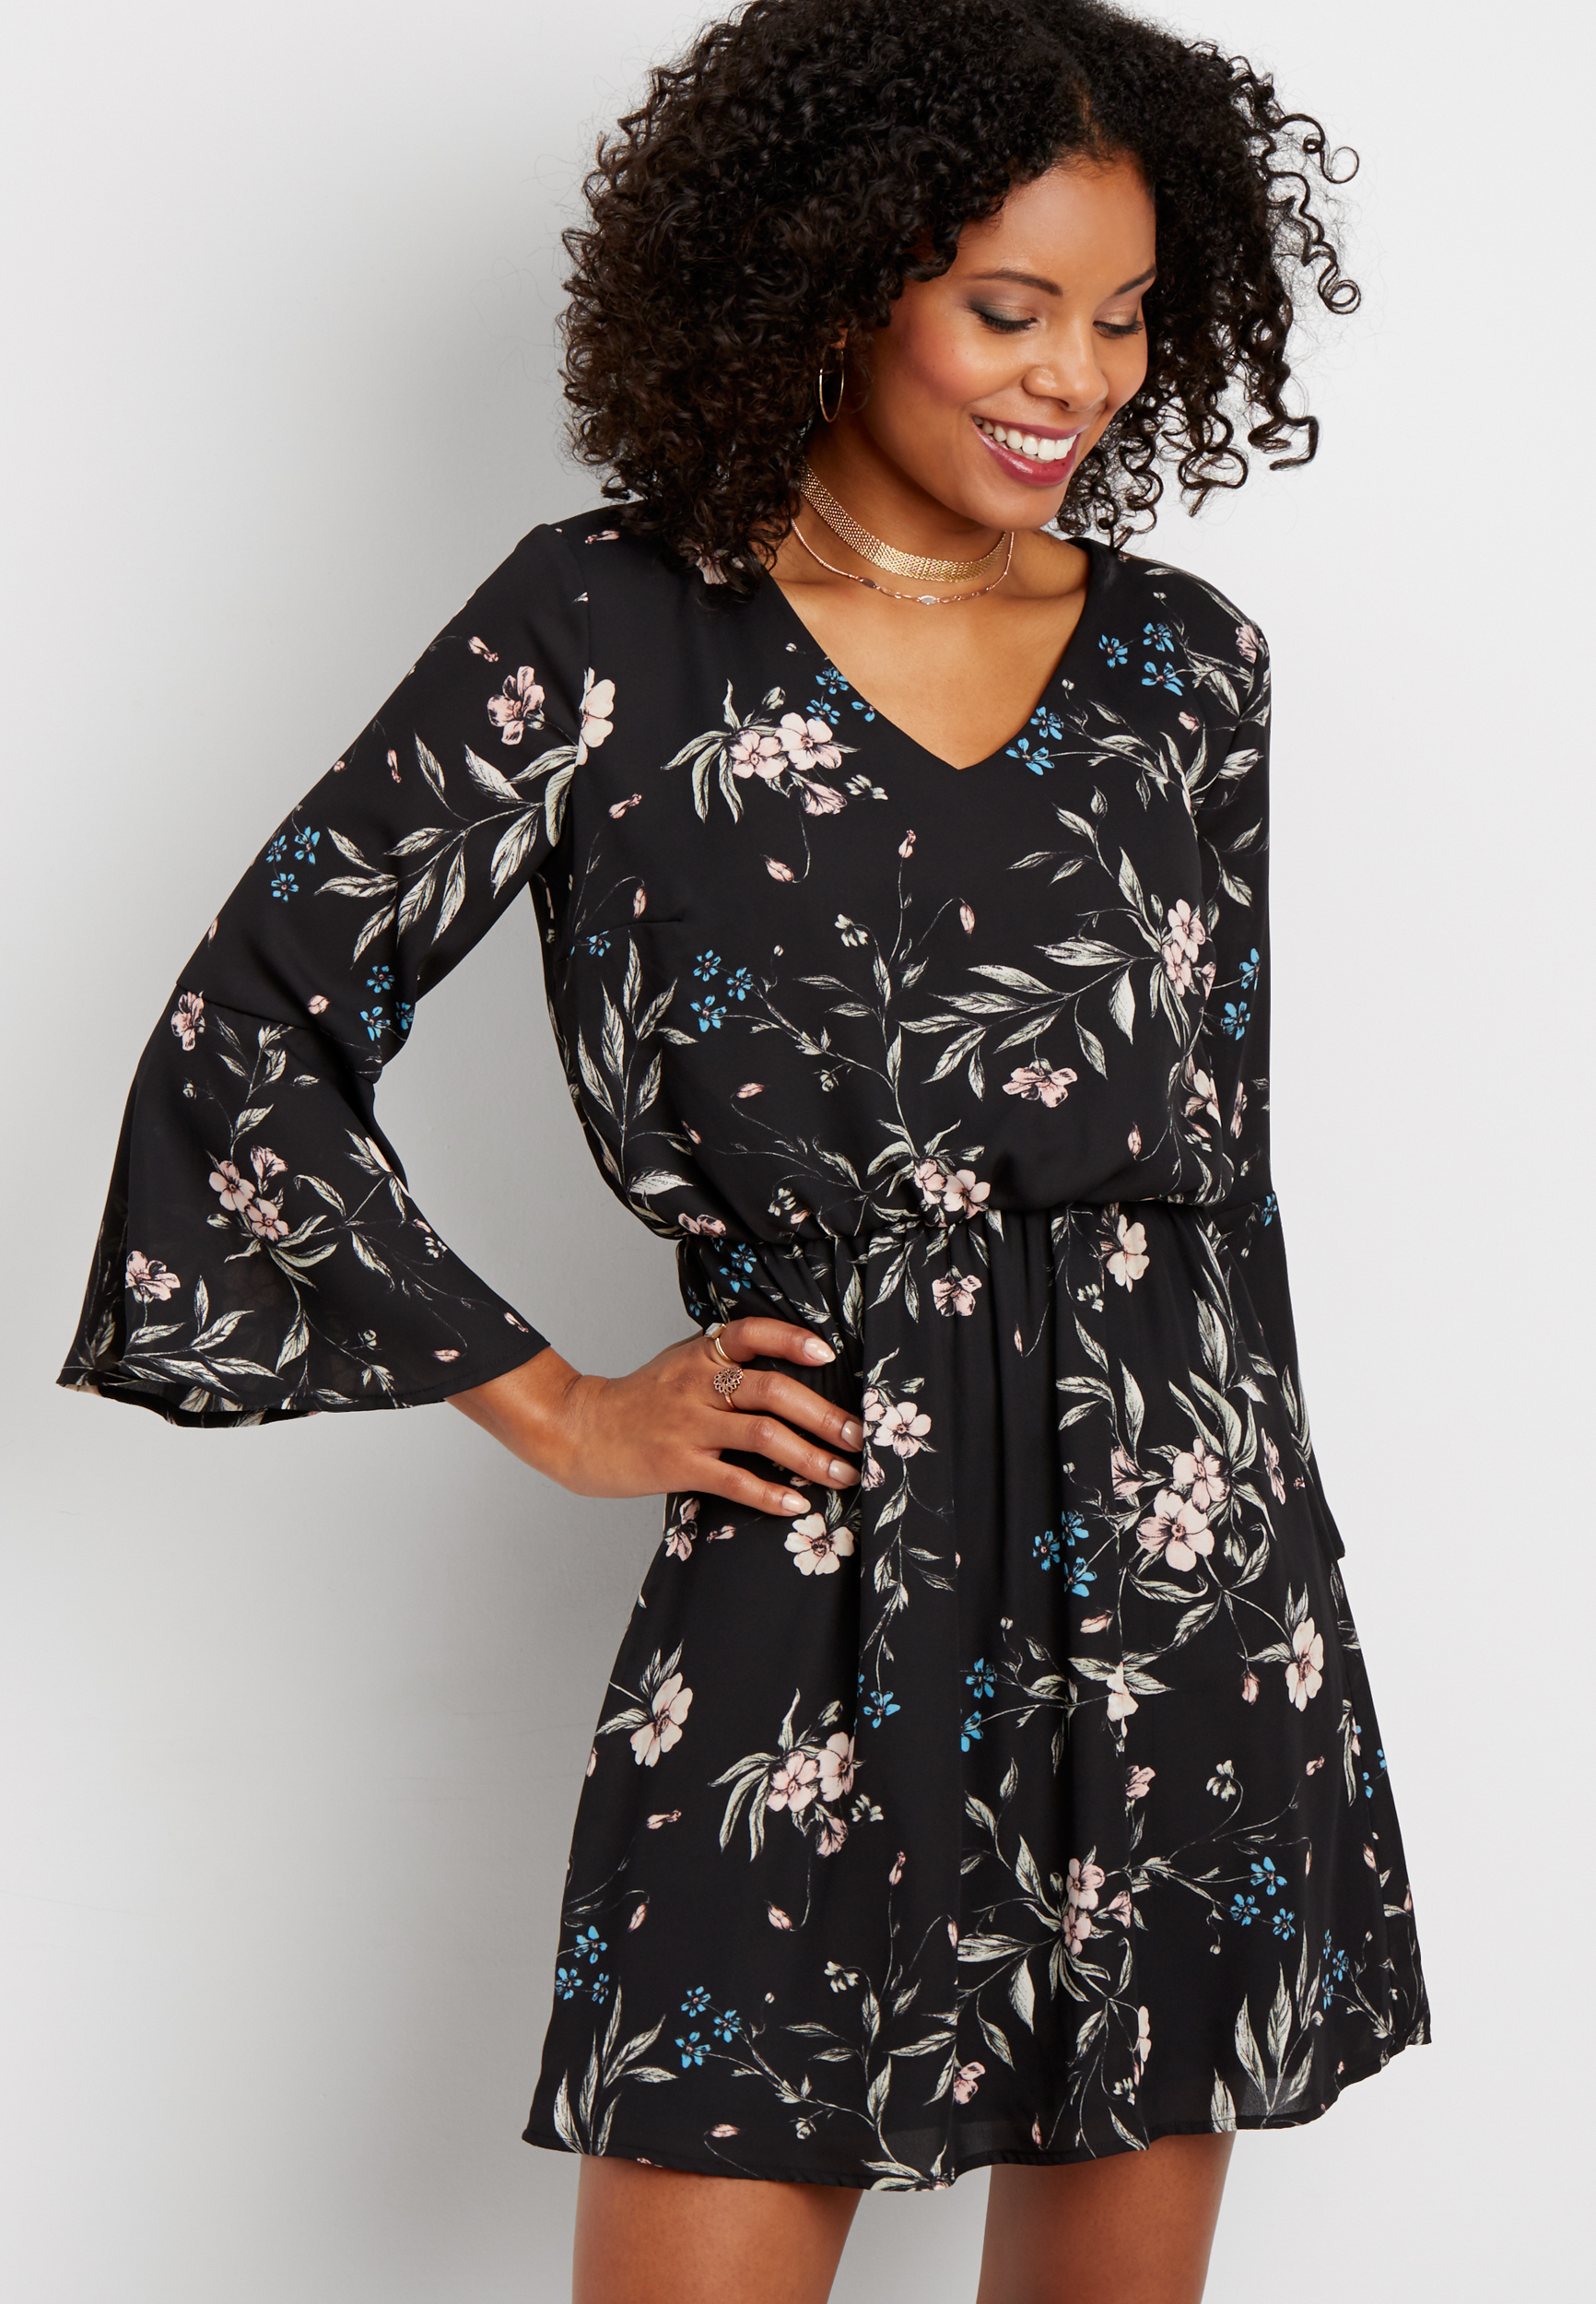 floral print chiffon dress with bell shaped sleeves | maurices